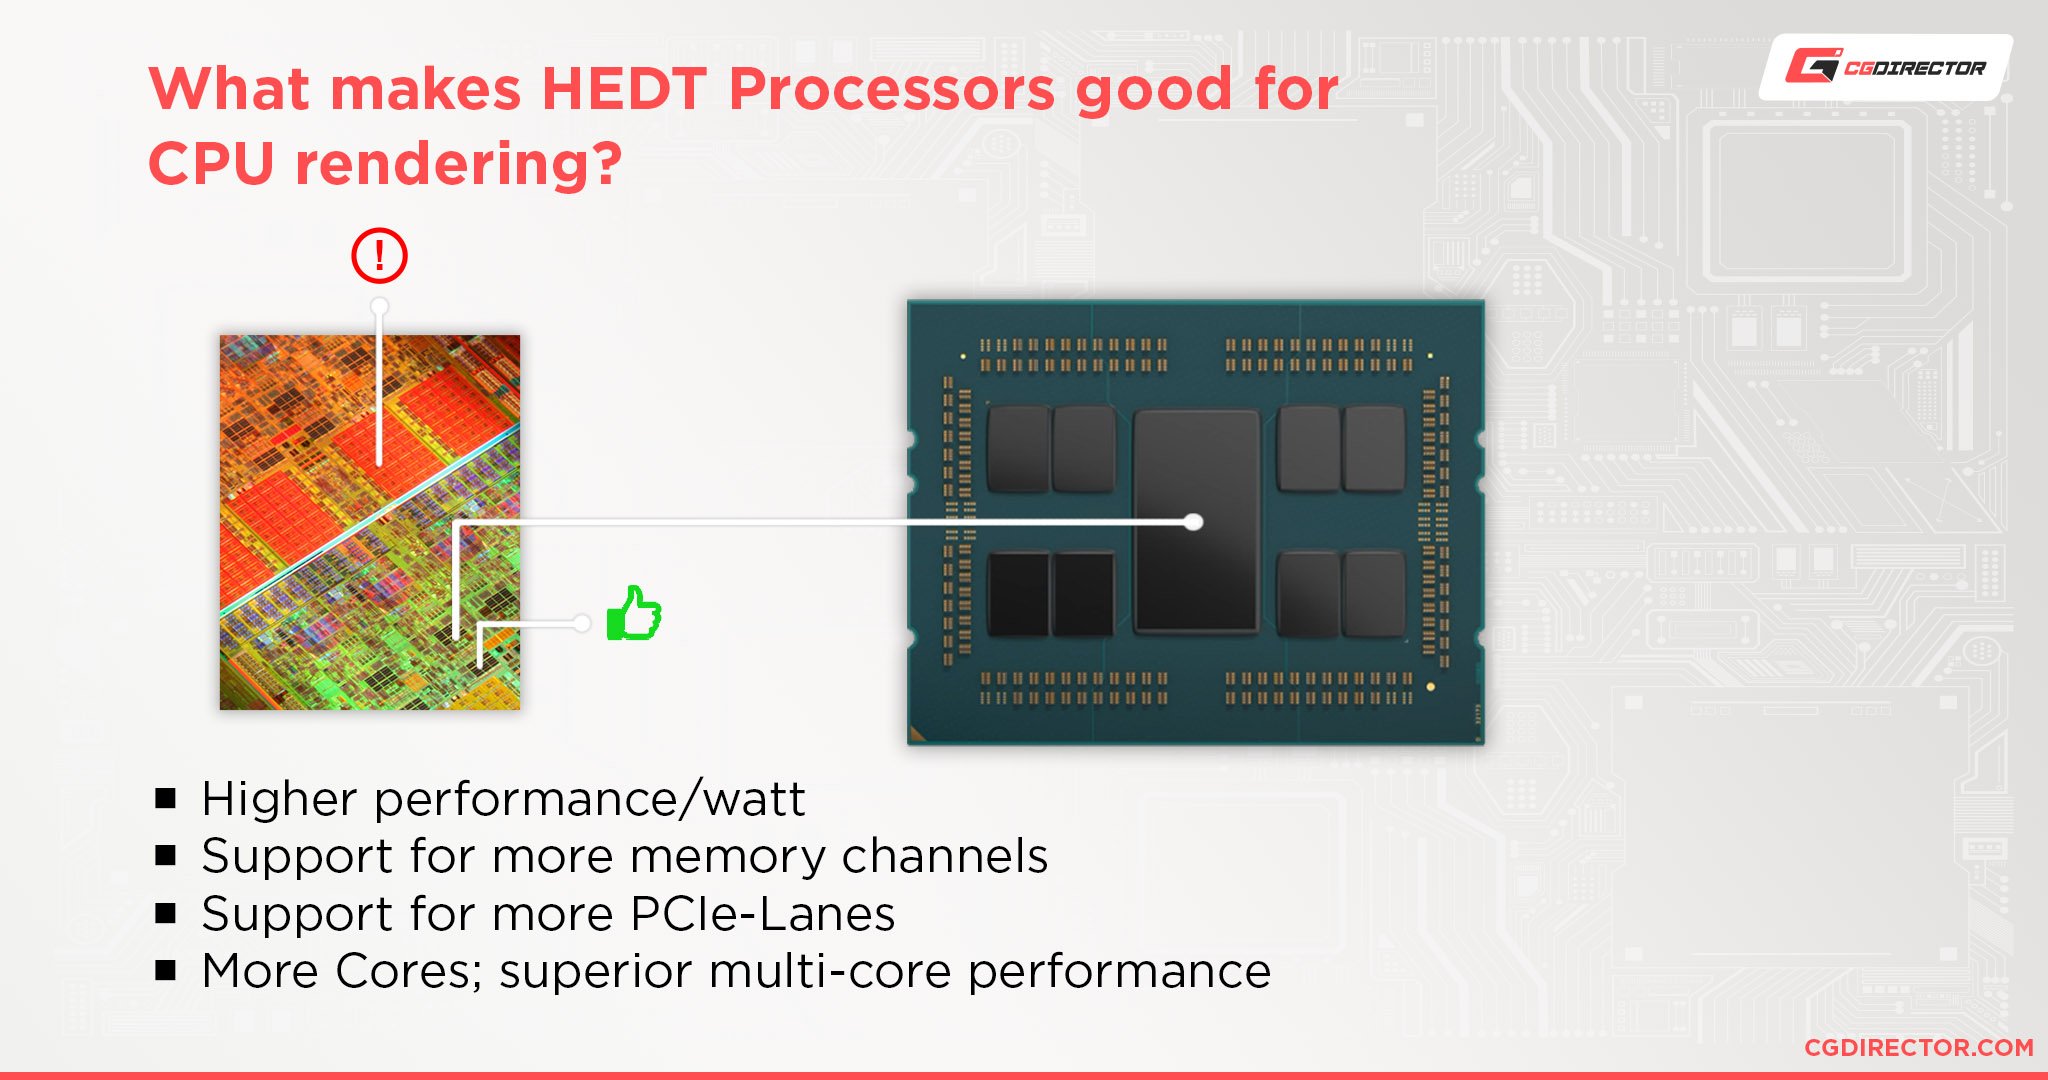 HEDT Processors